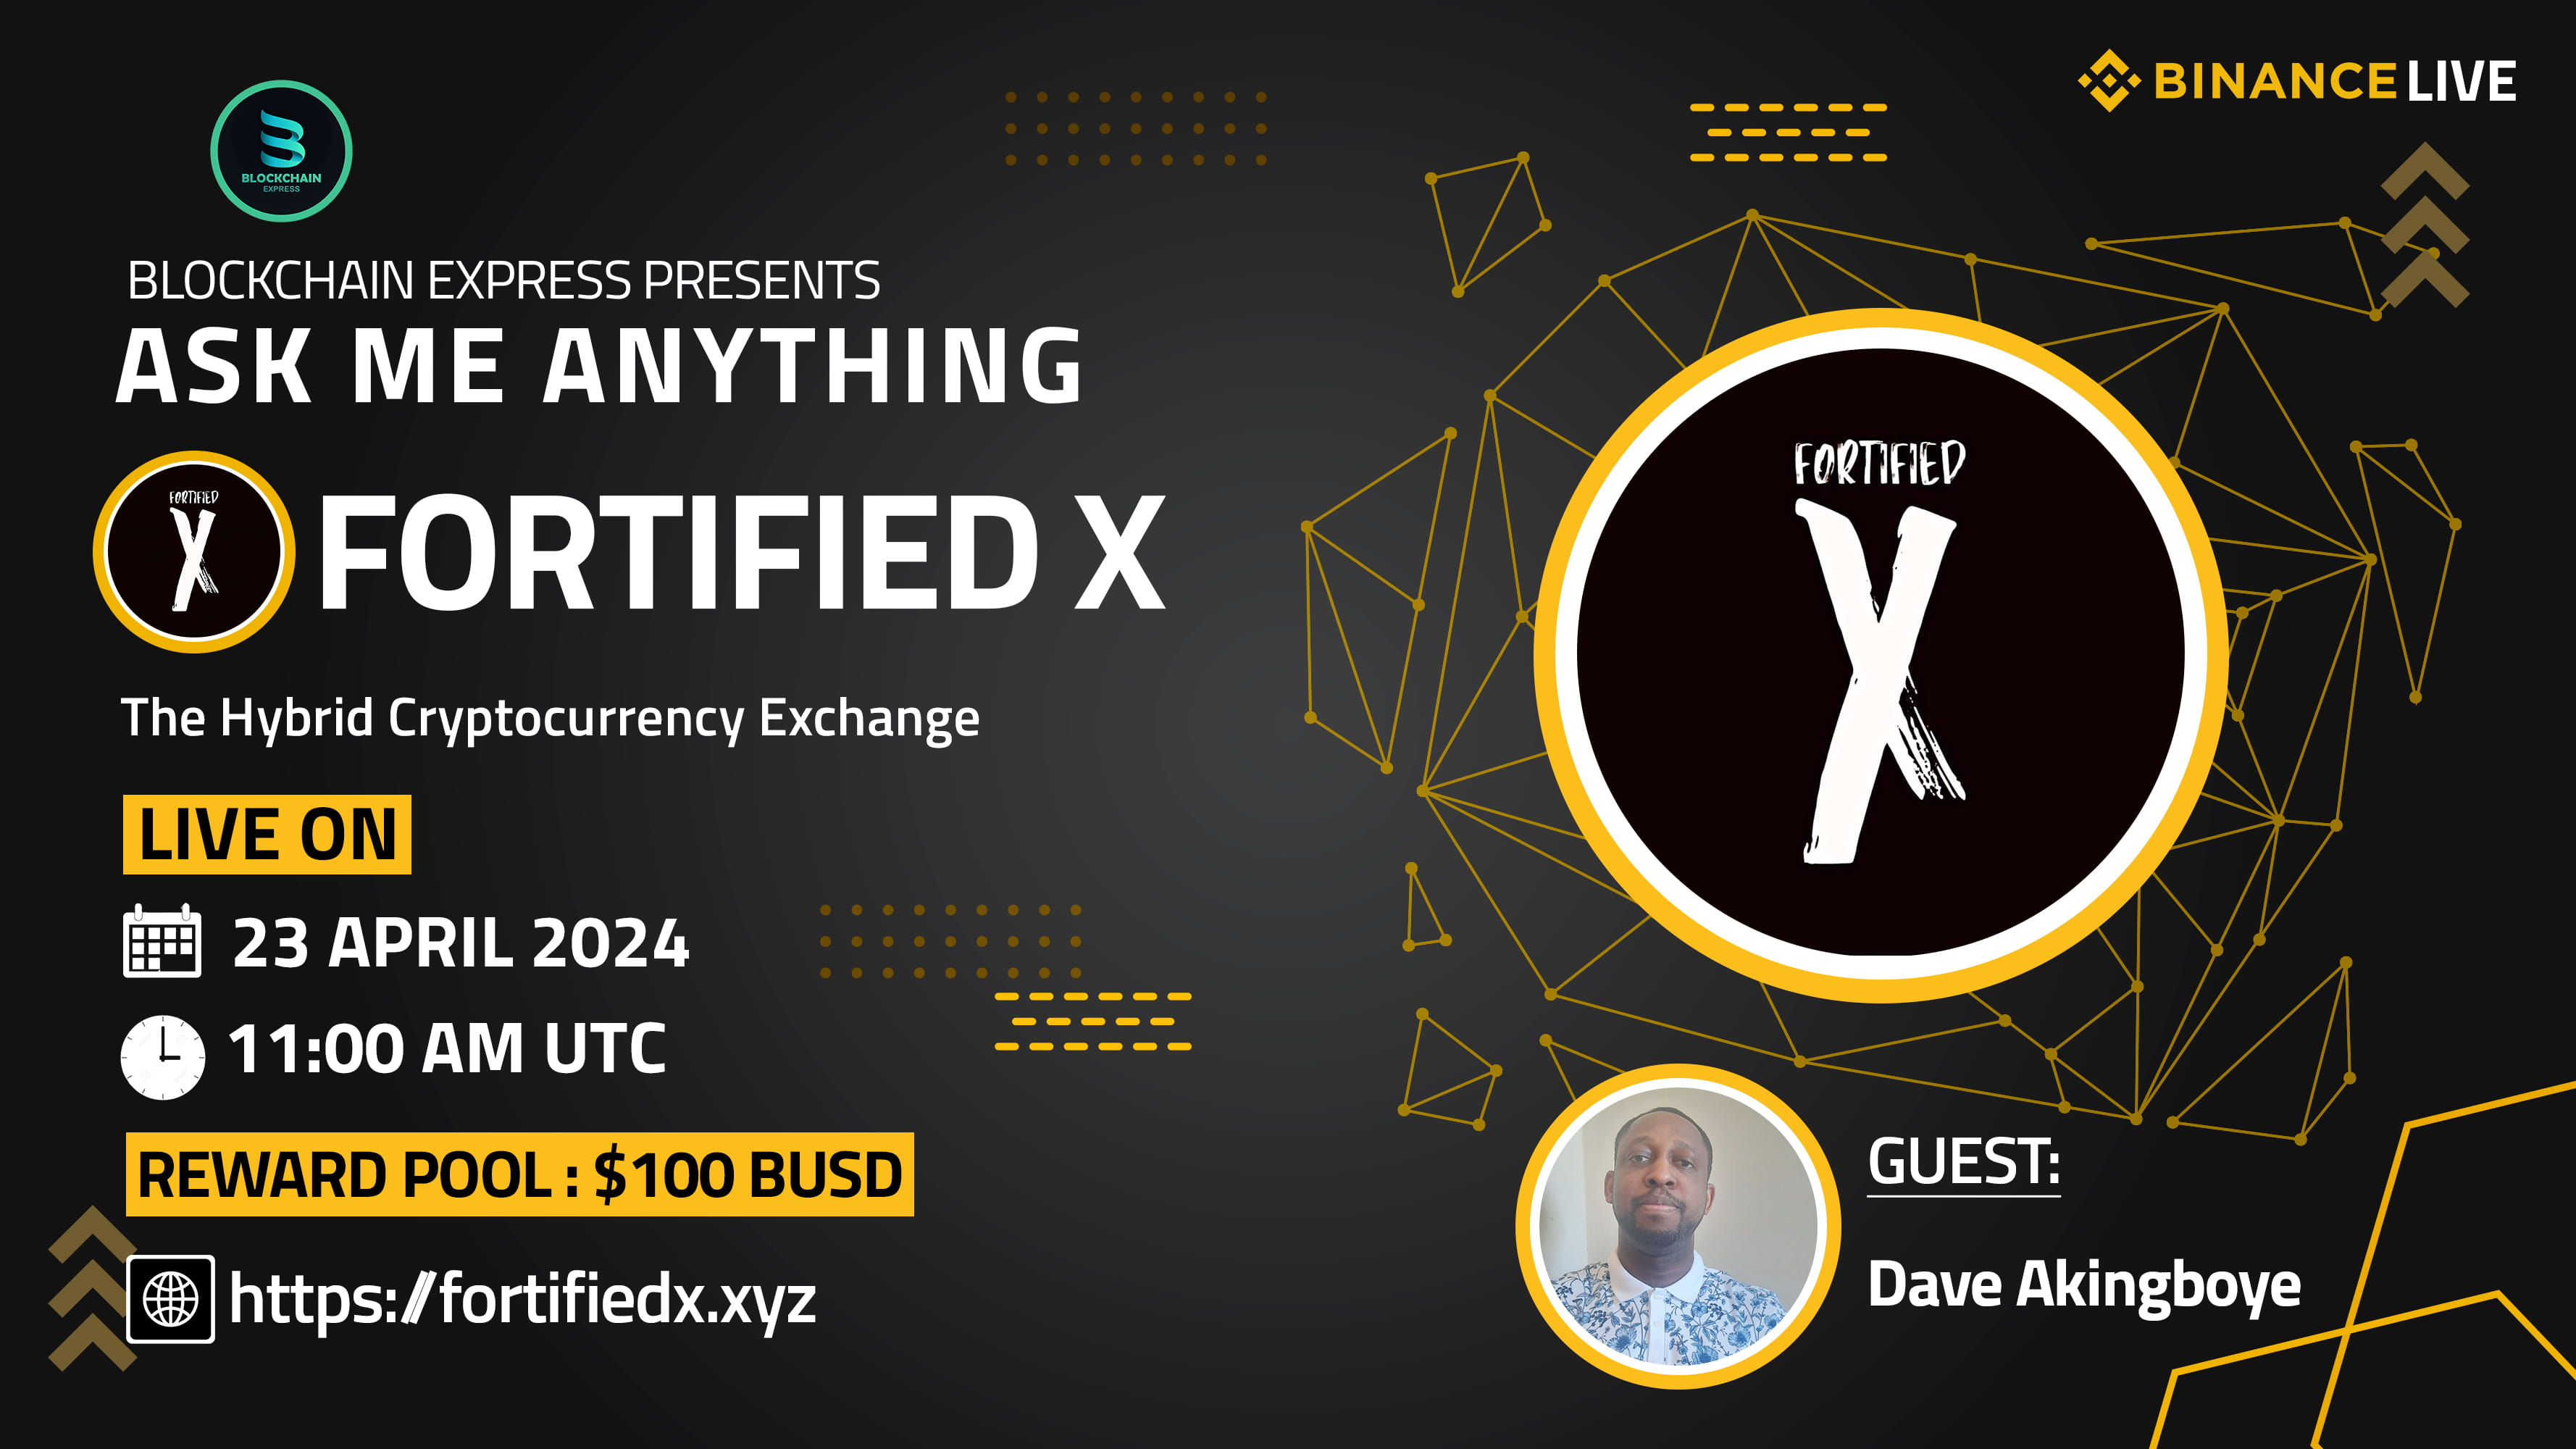 ₿lockchain Express will be hosting an AMA session with" Fortified X "